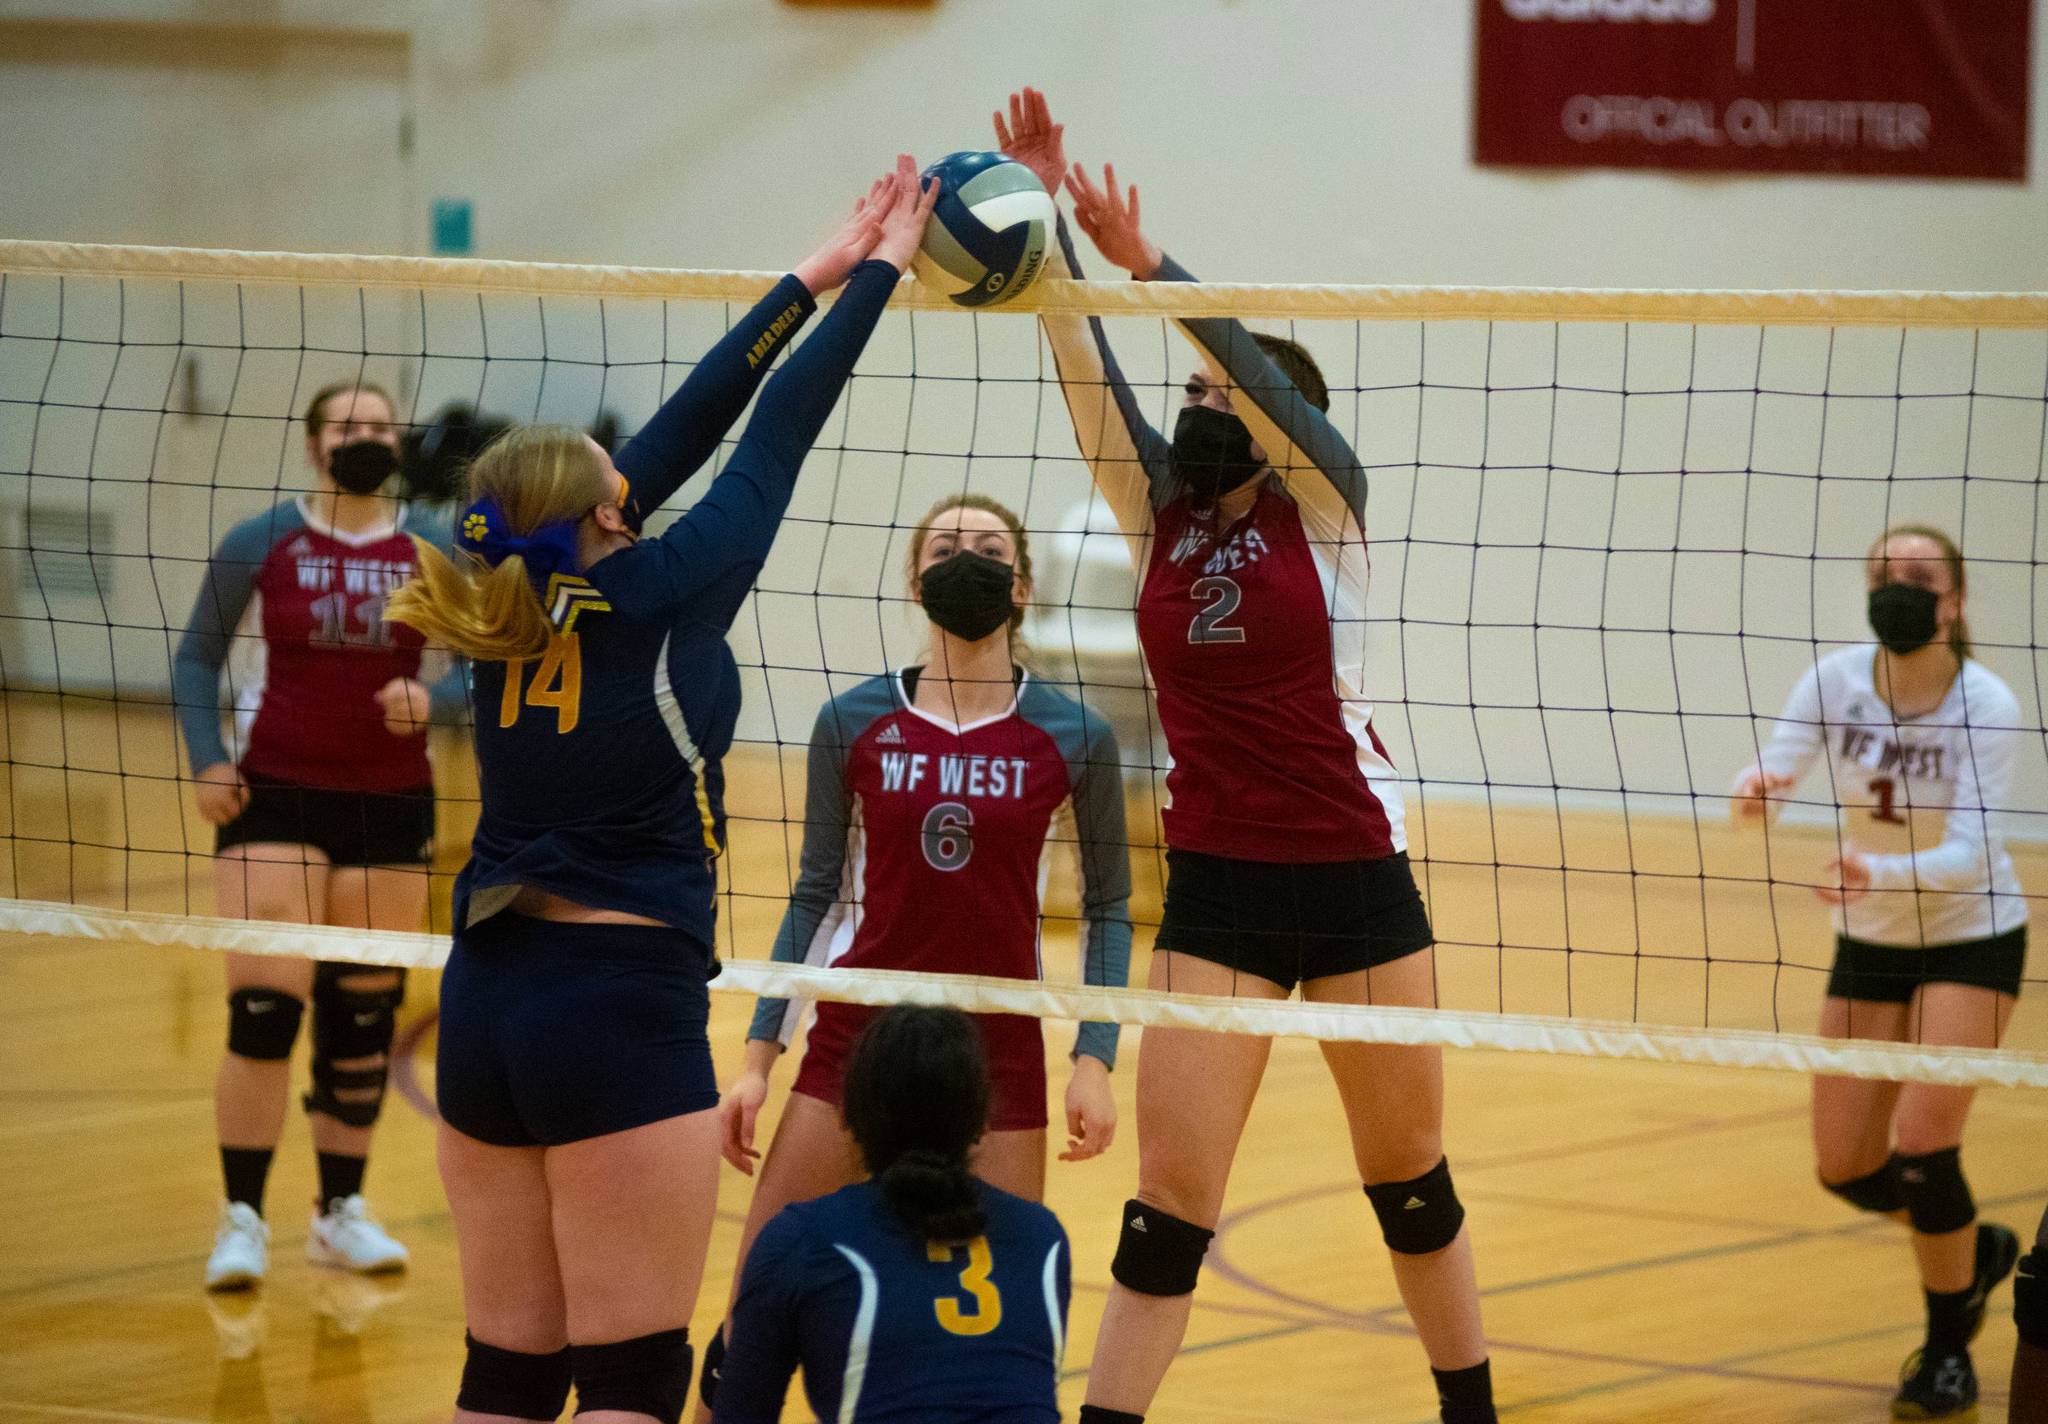 Eric Trent/The Chronicle
The W.F. West Bearcats defeated Aberdeen in straight sets Thursday in a volleyball match at Chehalis.